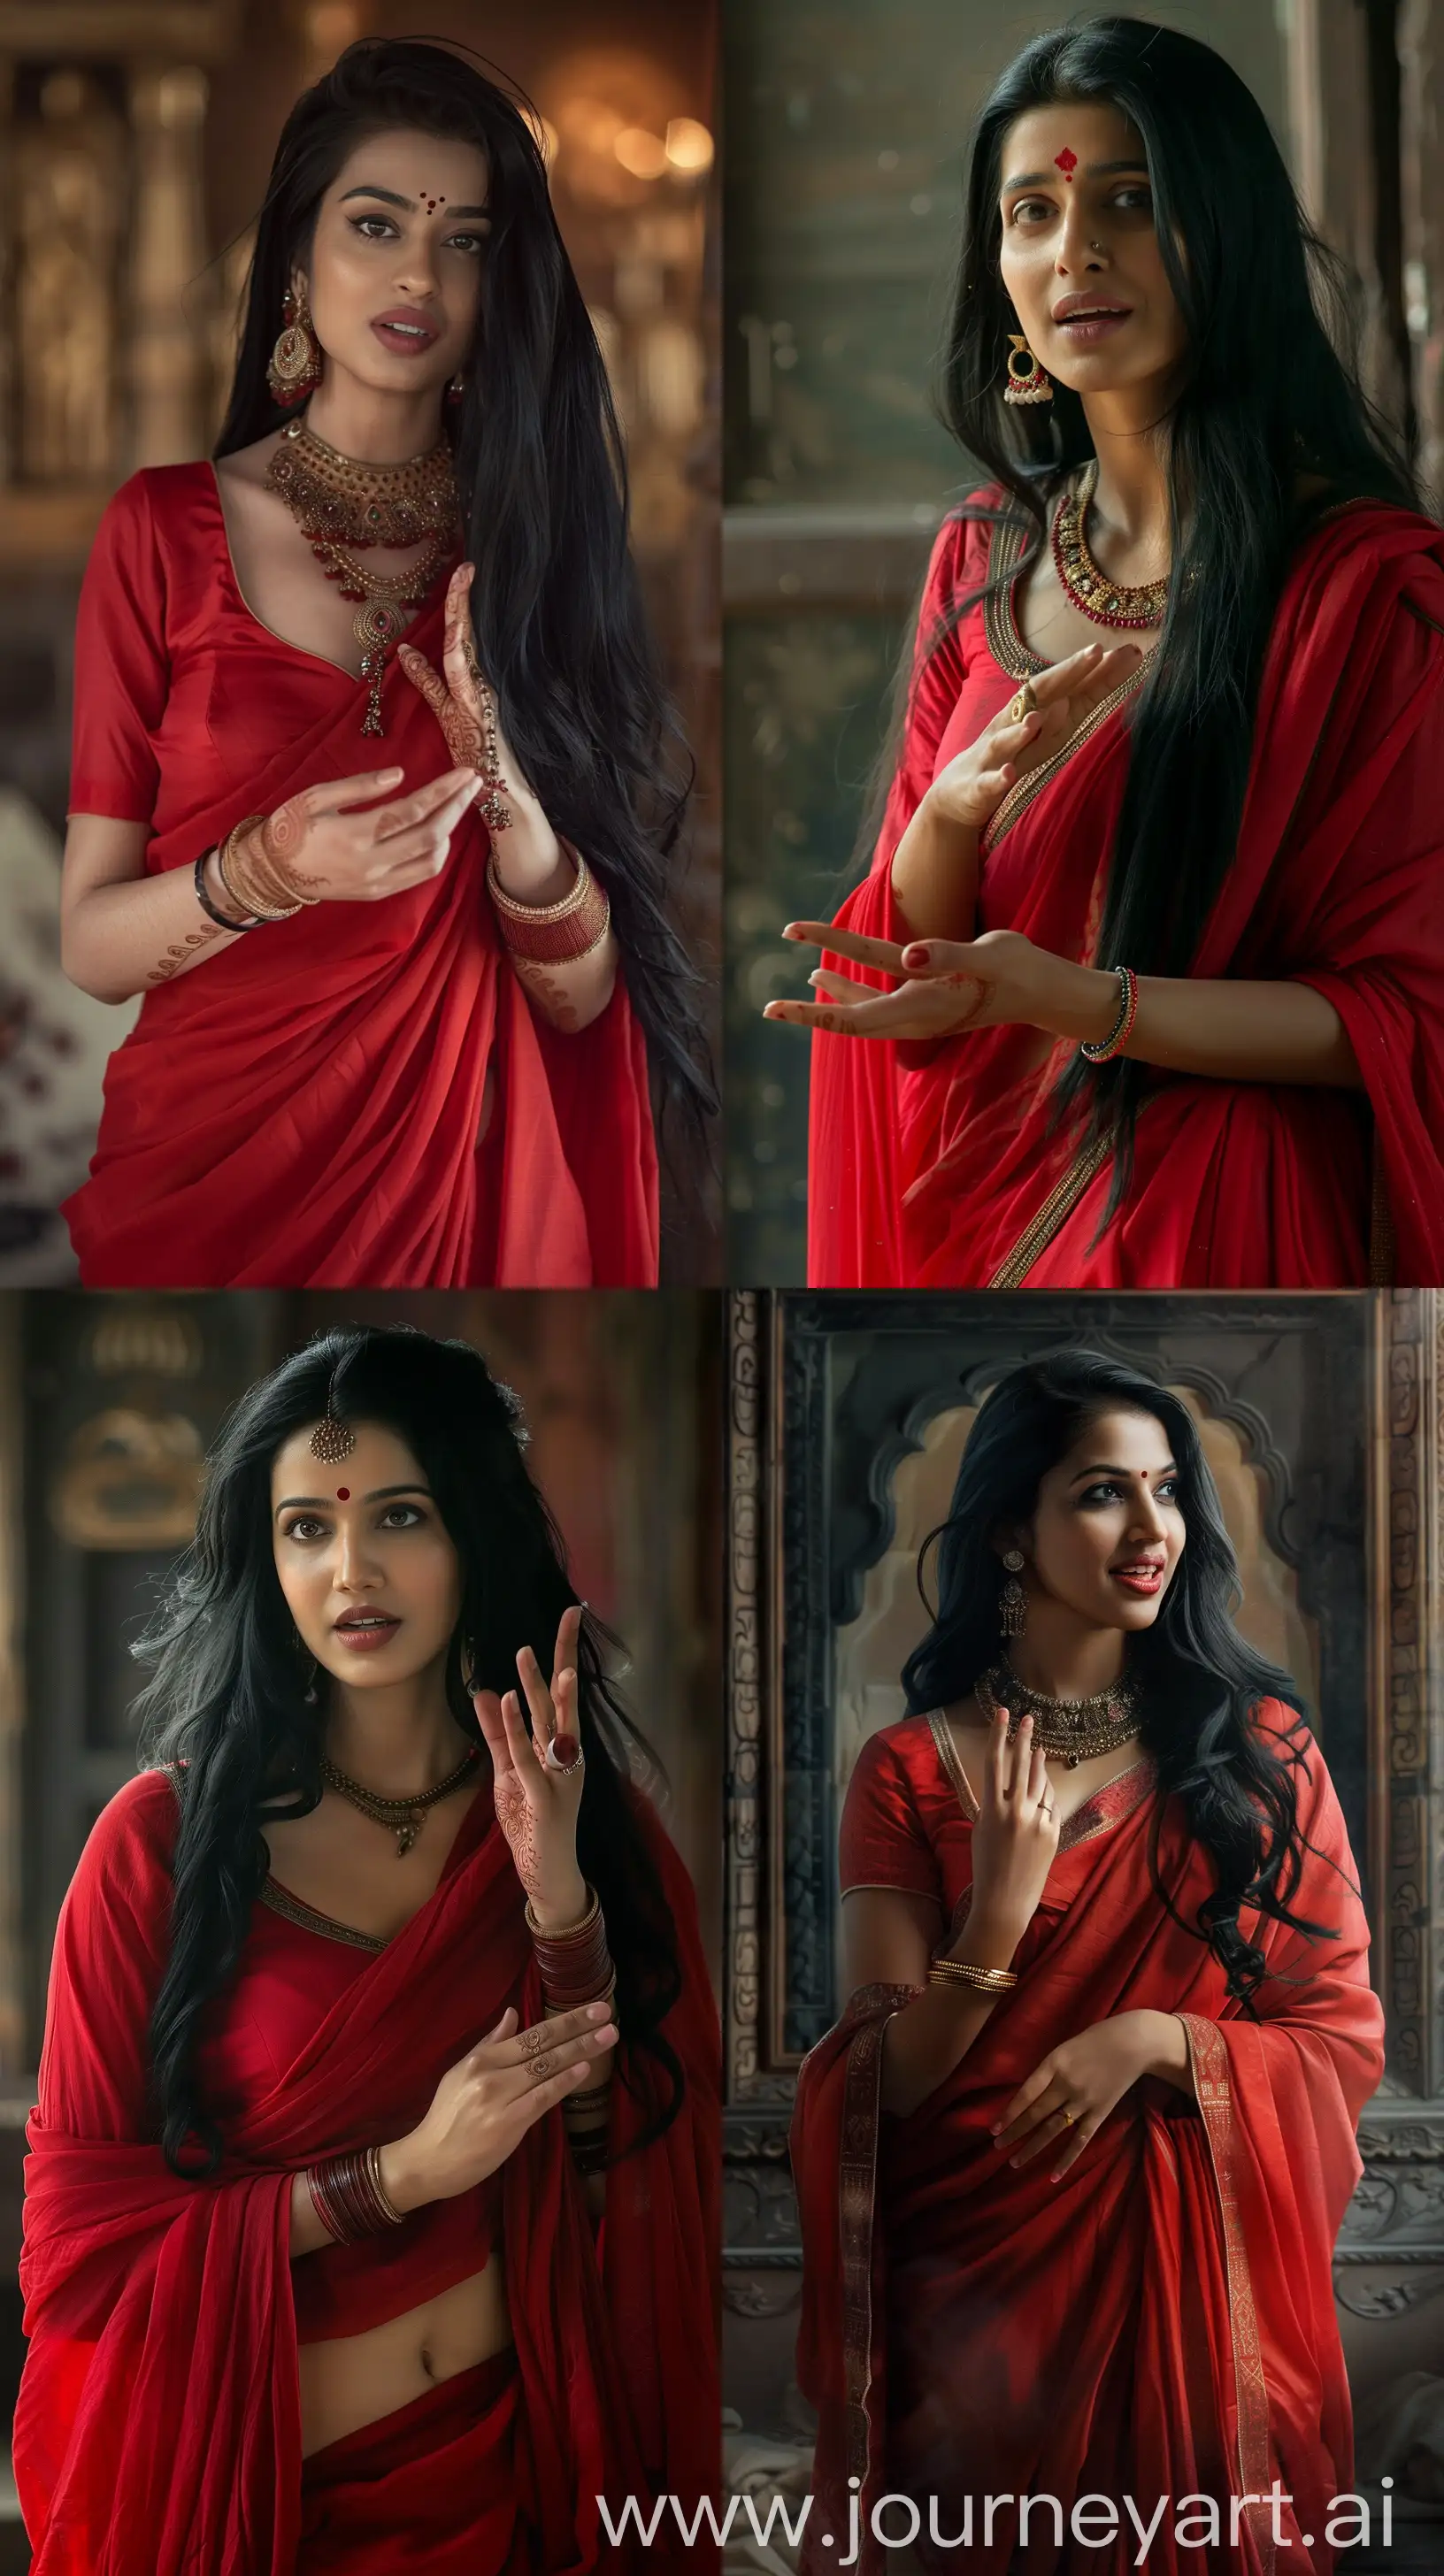 A beautiful Indian woman from ancient times in her thirties in red saree and black long hair,chatting, talking hand gestures,8k quality images, close-up image, intricate details --ar 9:16 